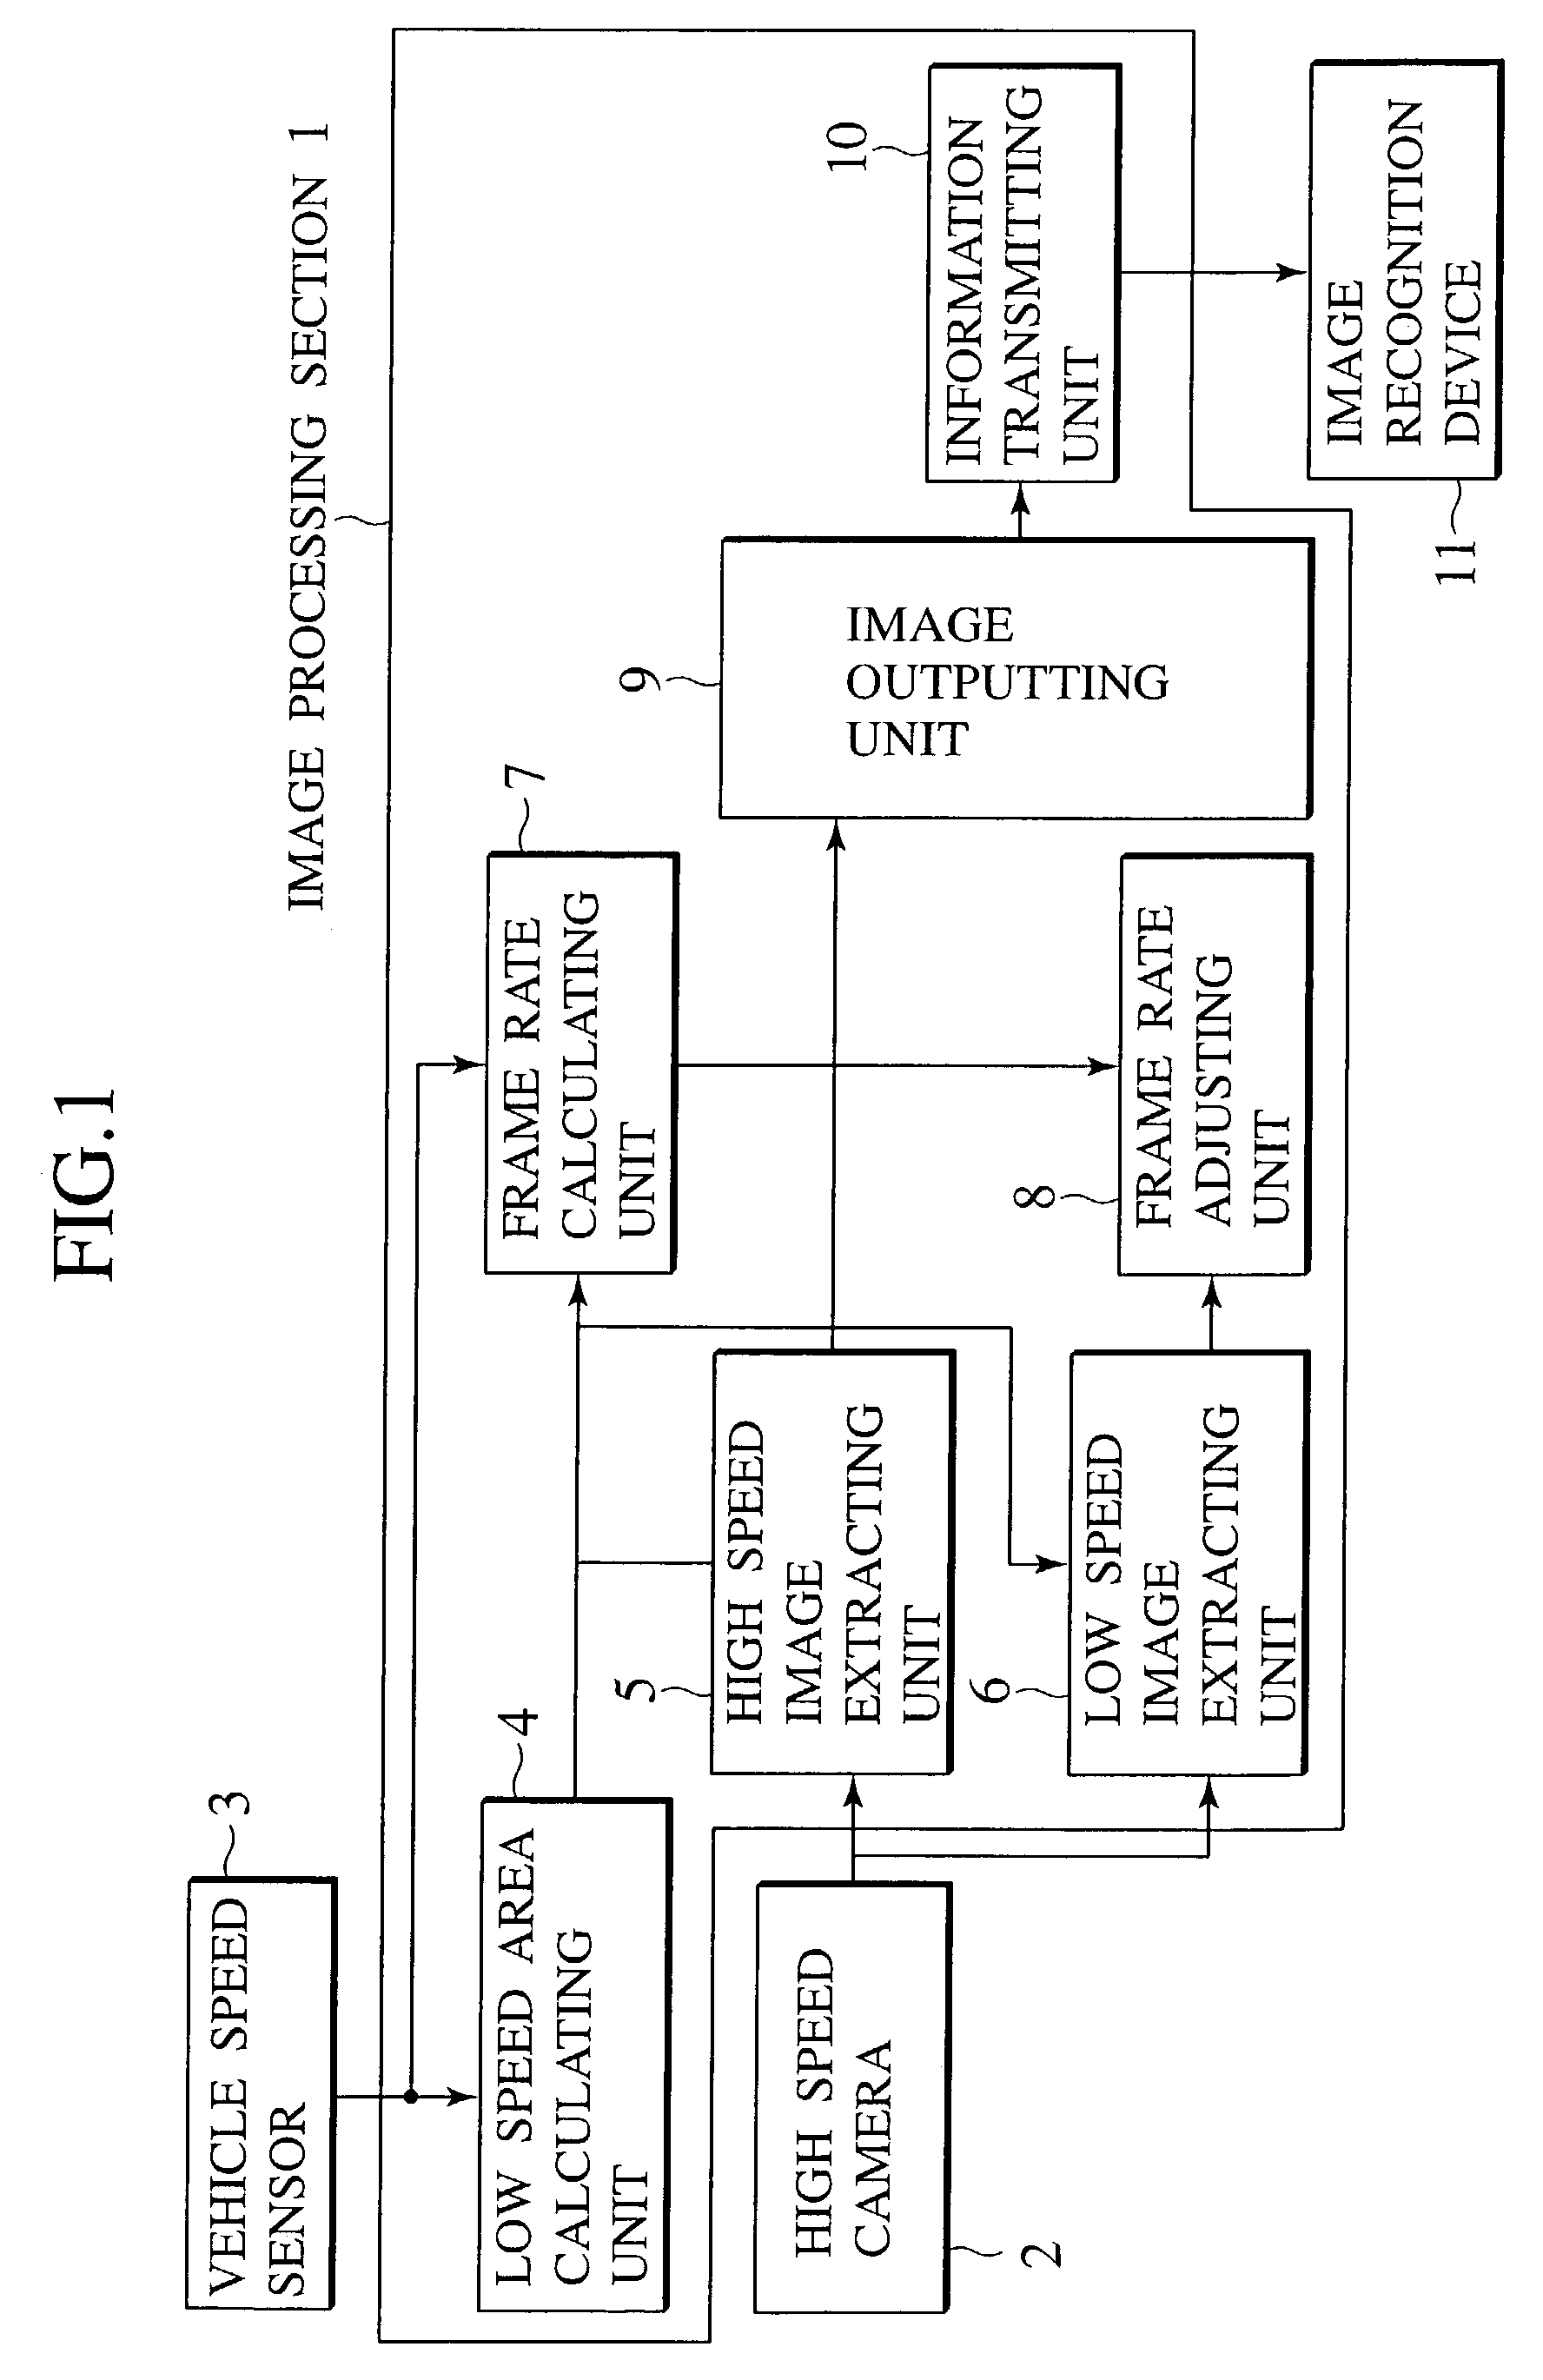 Vehicular image processing apparatus and related method